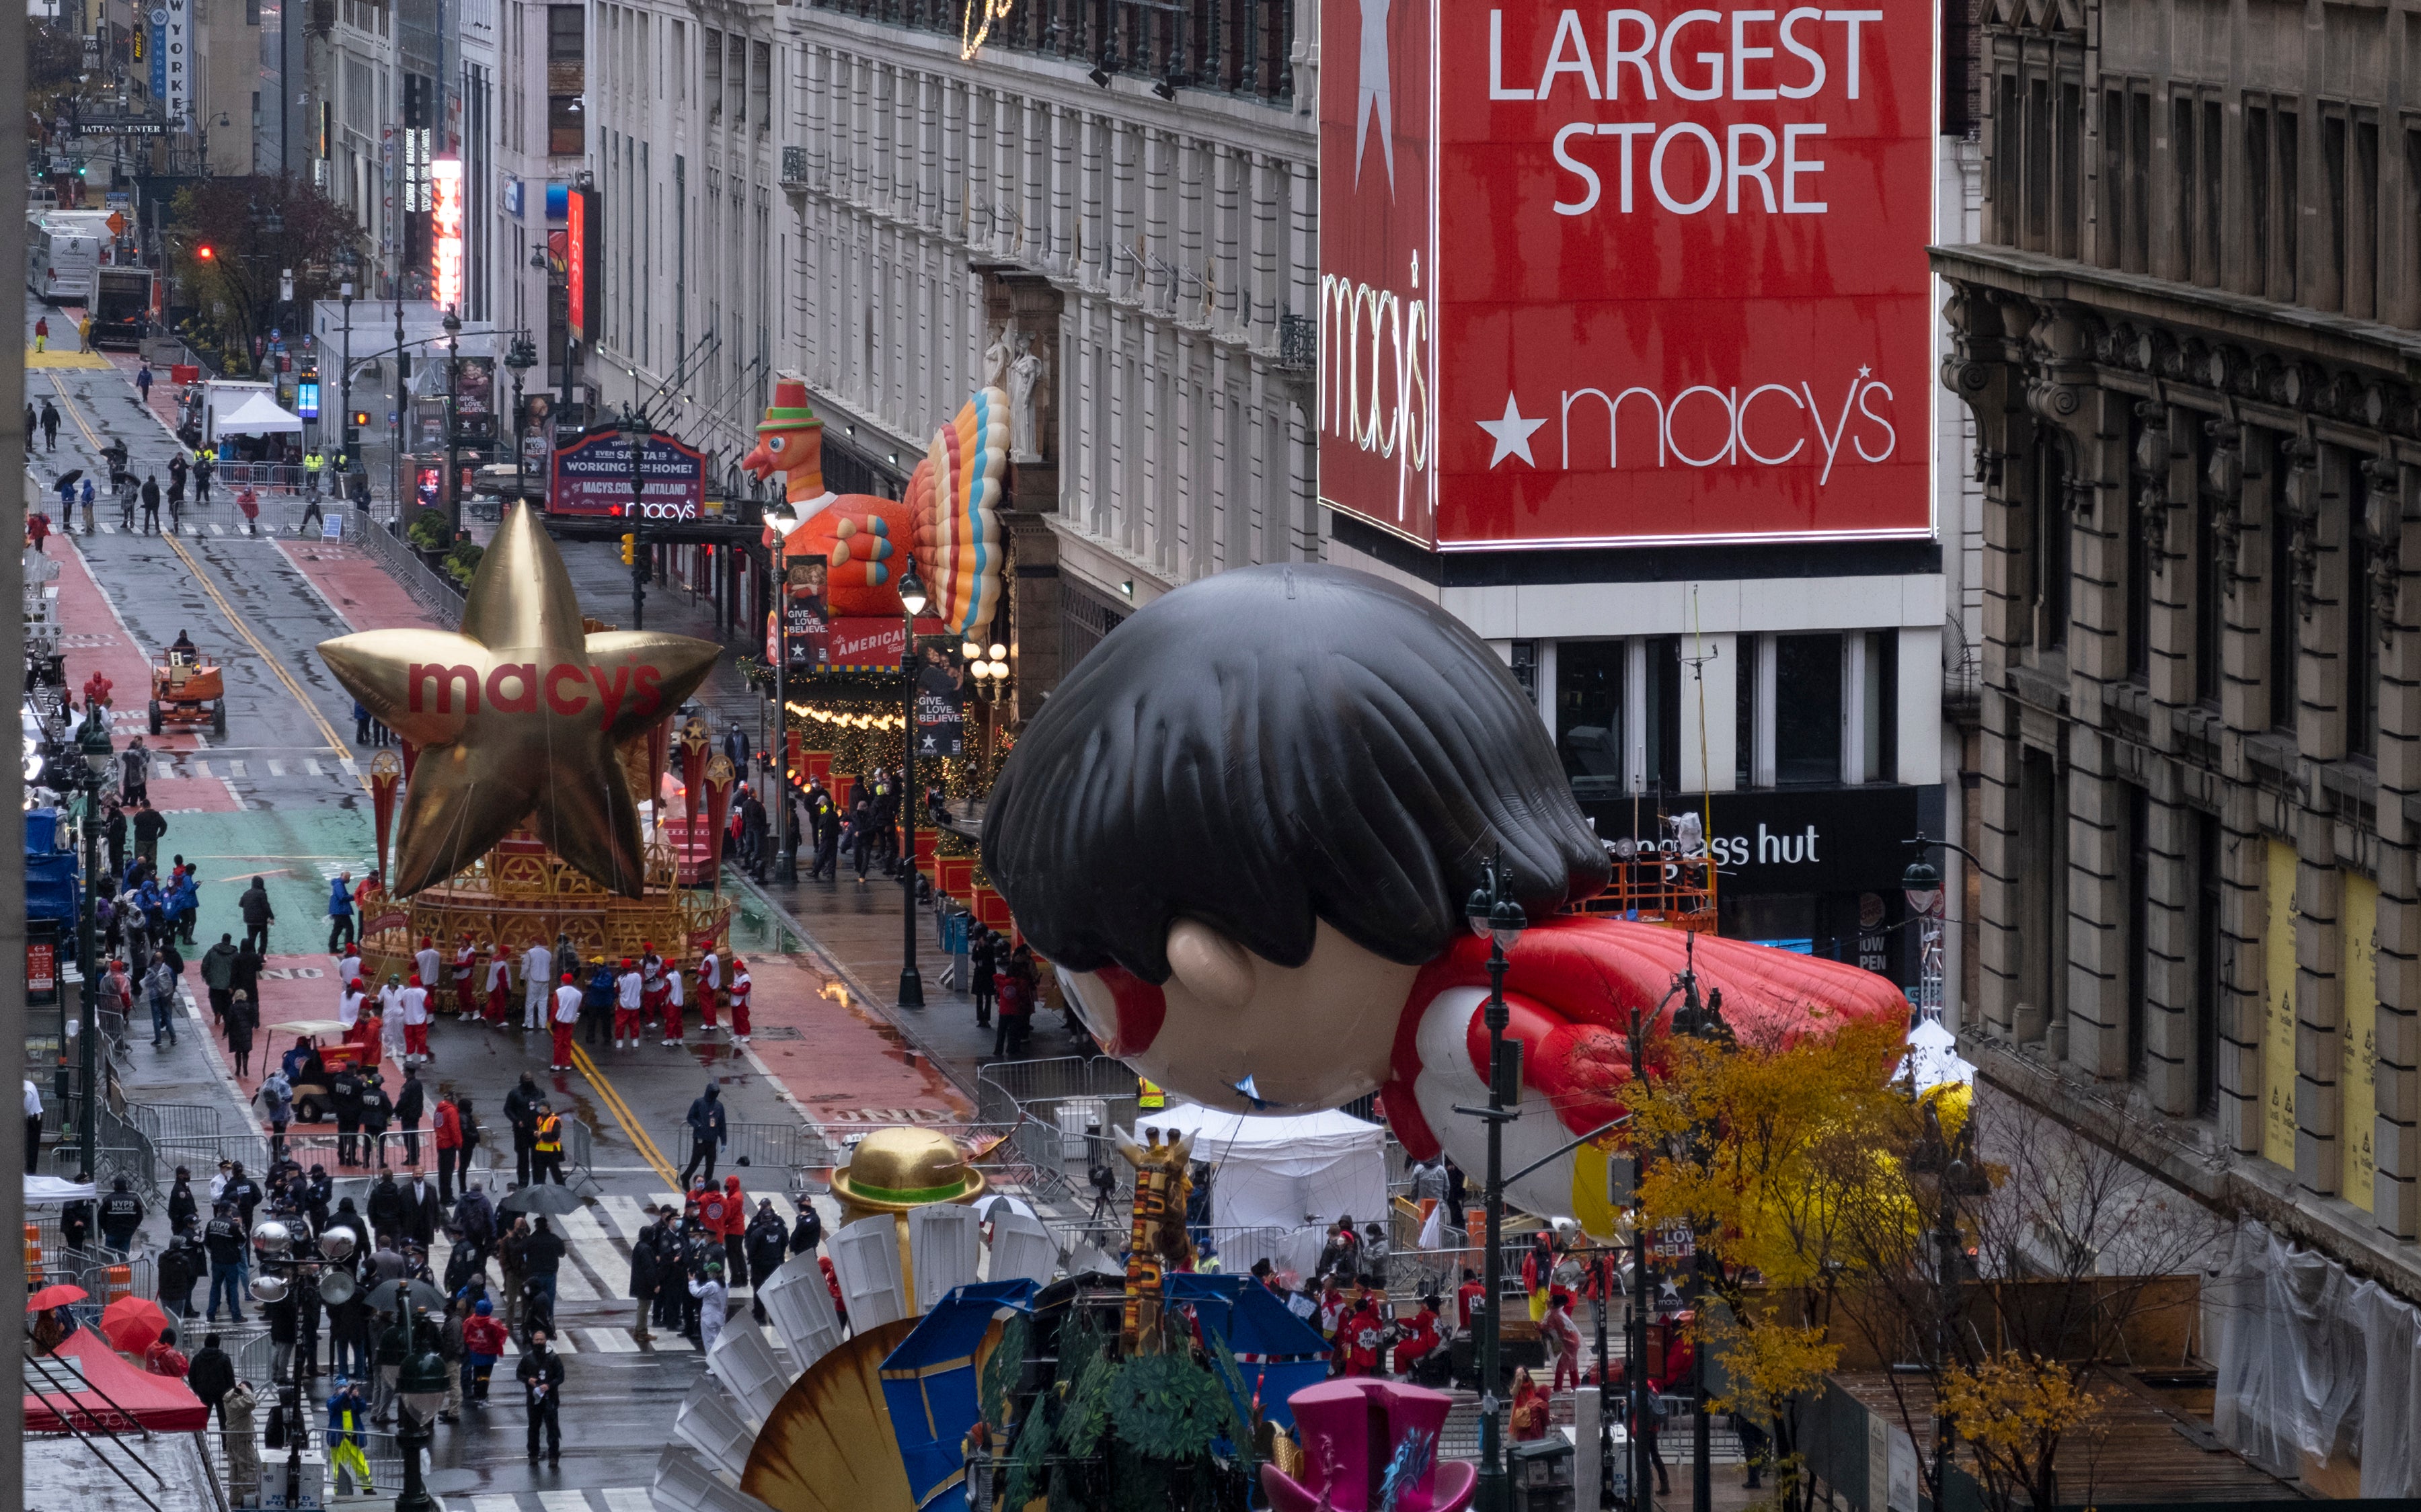 Macy’s is a major shopping attraction for visitors to New York